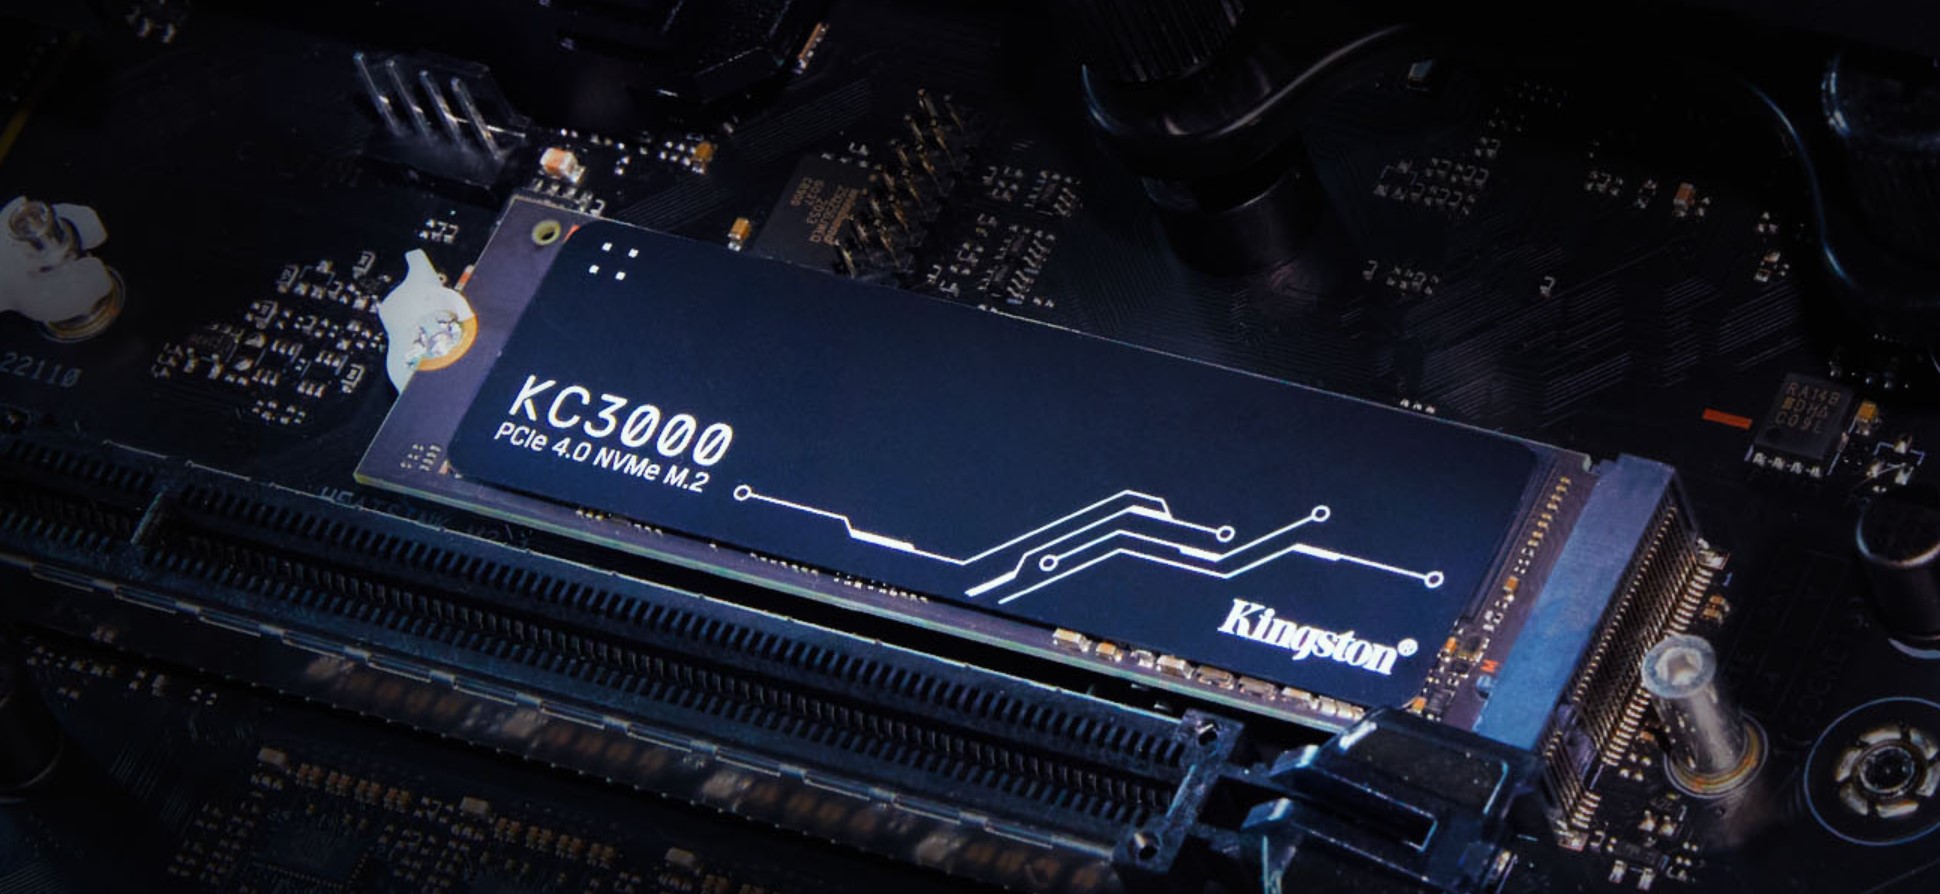 Kingston KC3000 PCIe 4.0 NVMe SSD (2TB) Review: A New Breed of Speed